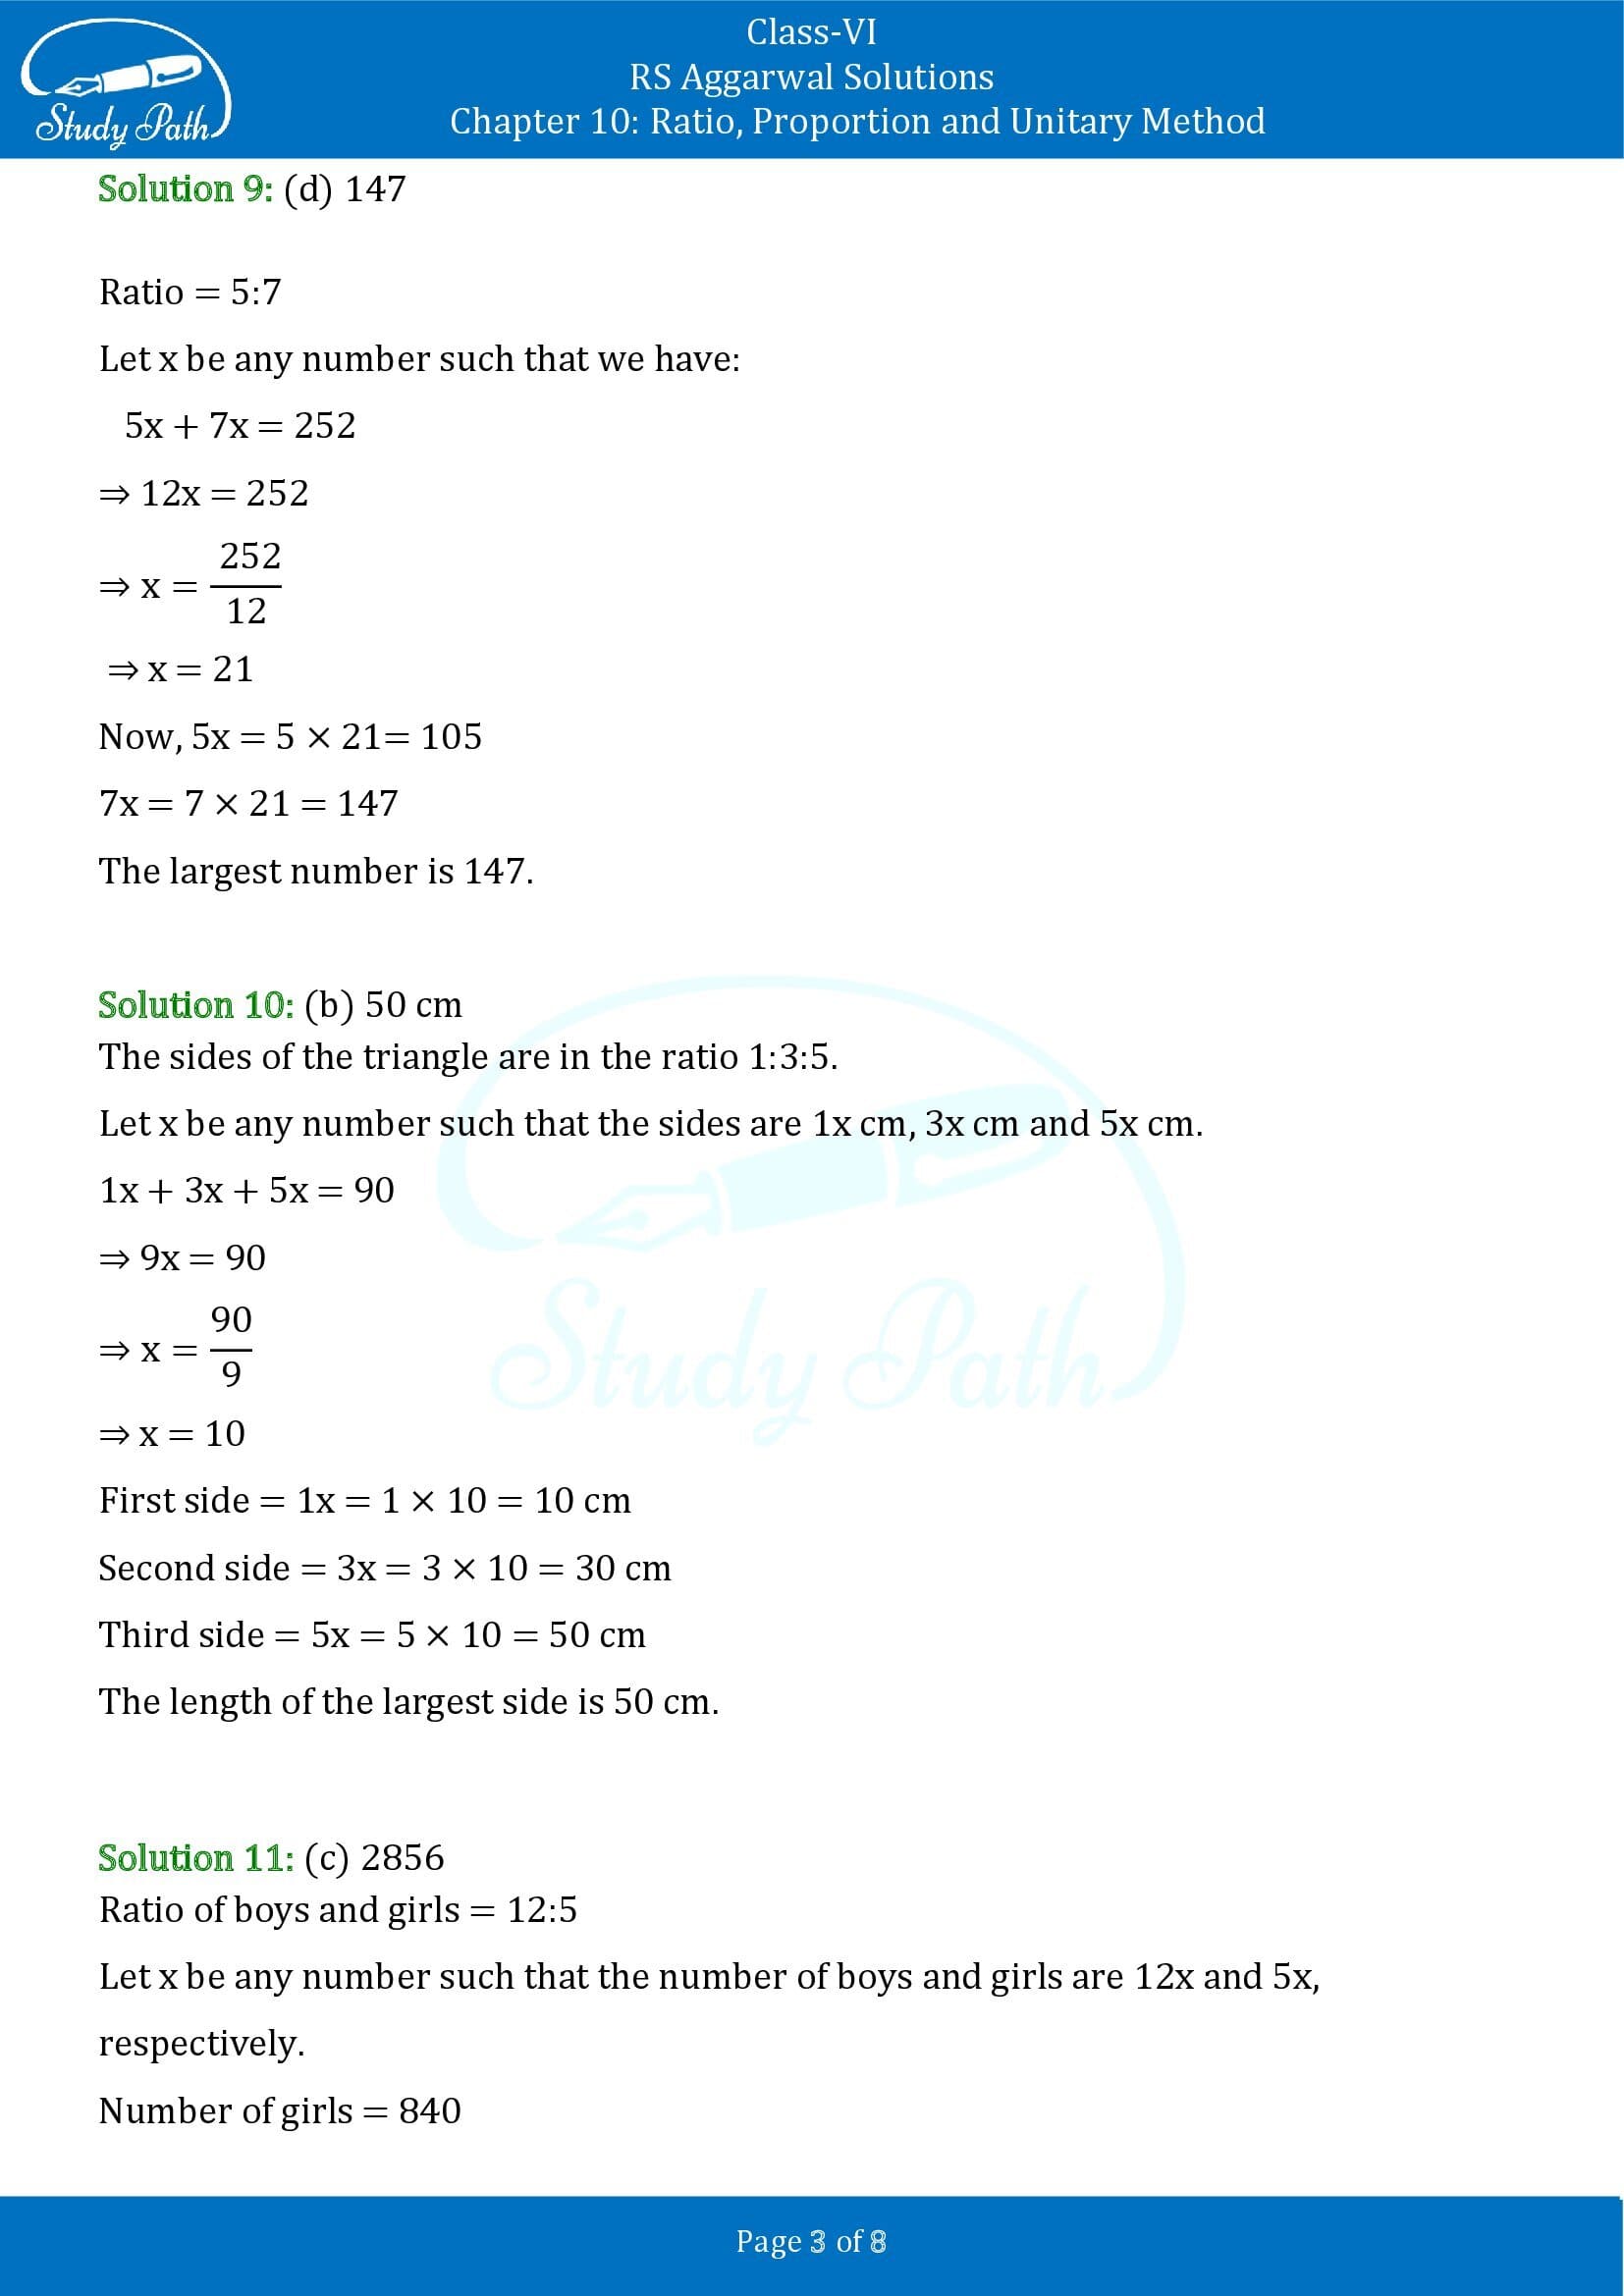 RS Aggarwal Solutions Class 6 Chapter 10 Ratio Proportion and Unitary Method Exercise 10D MCQs 00003